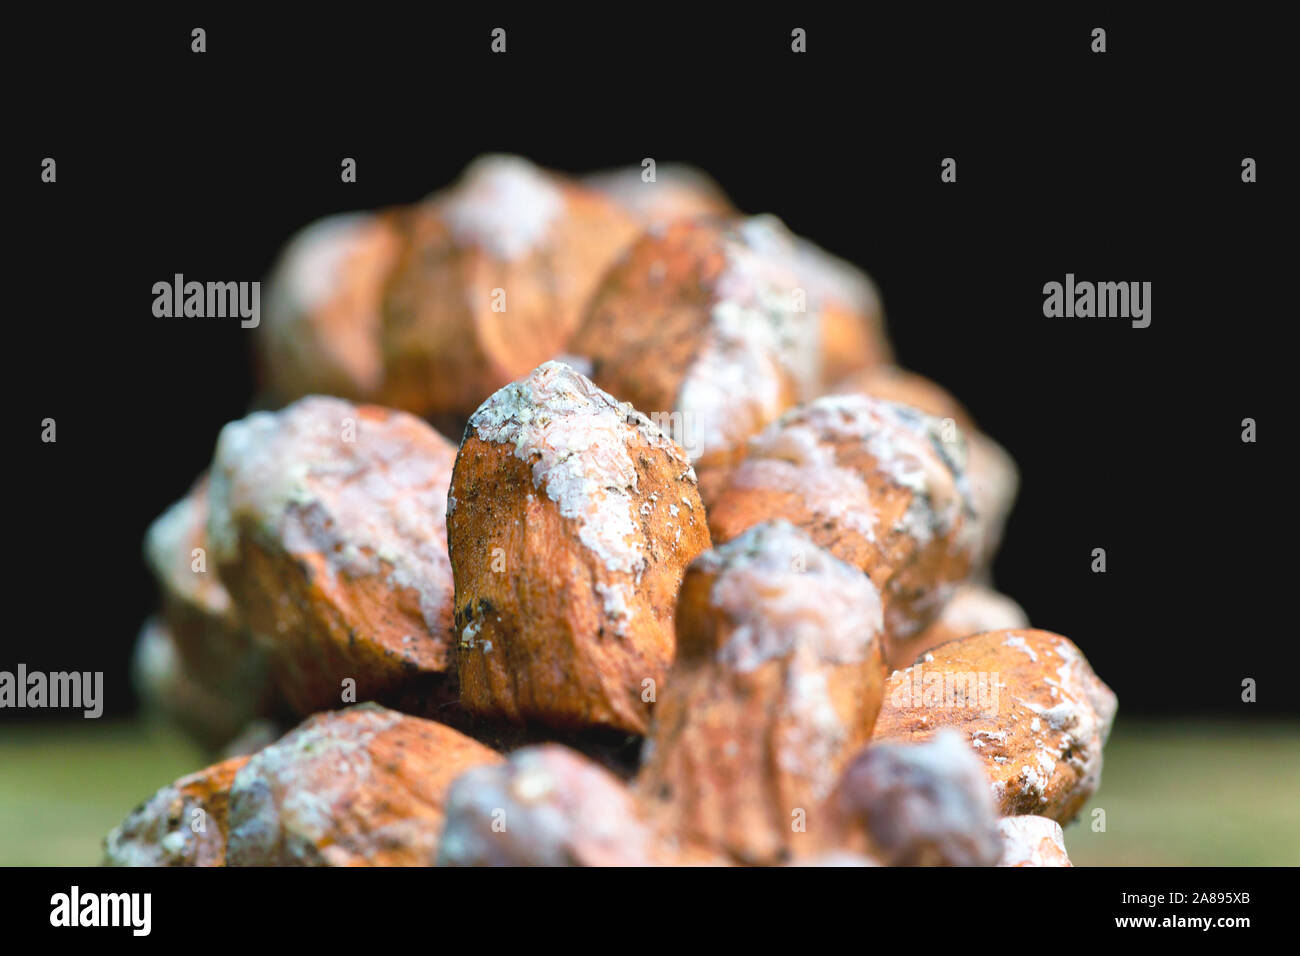 Close up of a white rot fungi decomposing a pine cone Stock Photo